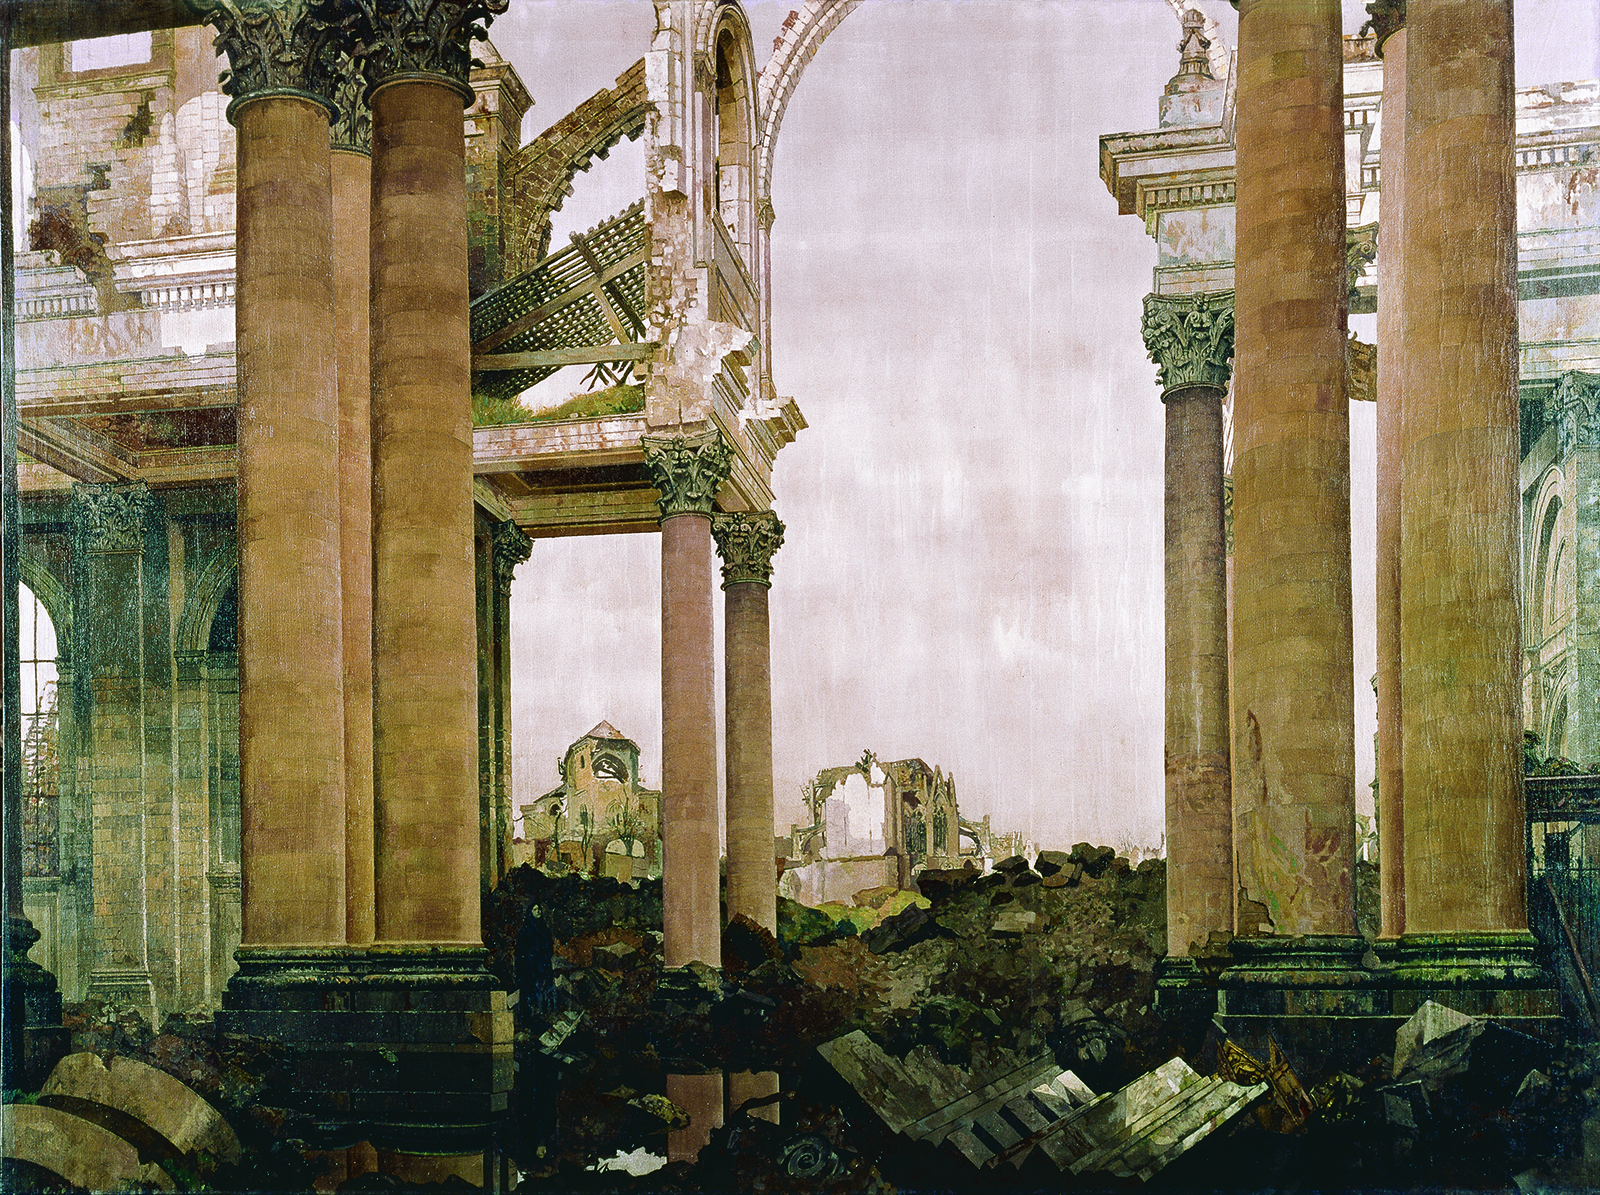 After four years of constant bombardment, the northern French city of Arras was virtually demolished. James Kerr-Lawson captured the devastation as evocatively as in his <em>The Cloth Hall, Ypres</em>, which hangs on the opposite wall of the Senate Chamber. (Beaverbrook Collection of War Art, Canadian War Museum, CWM 19710261-0335)